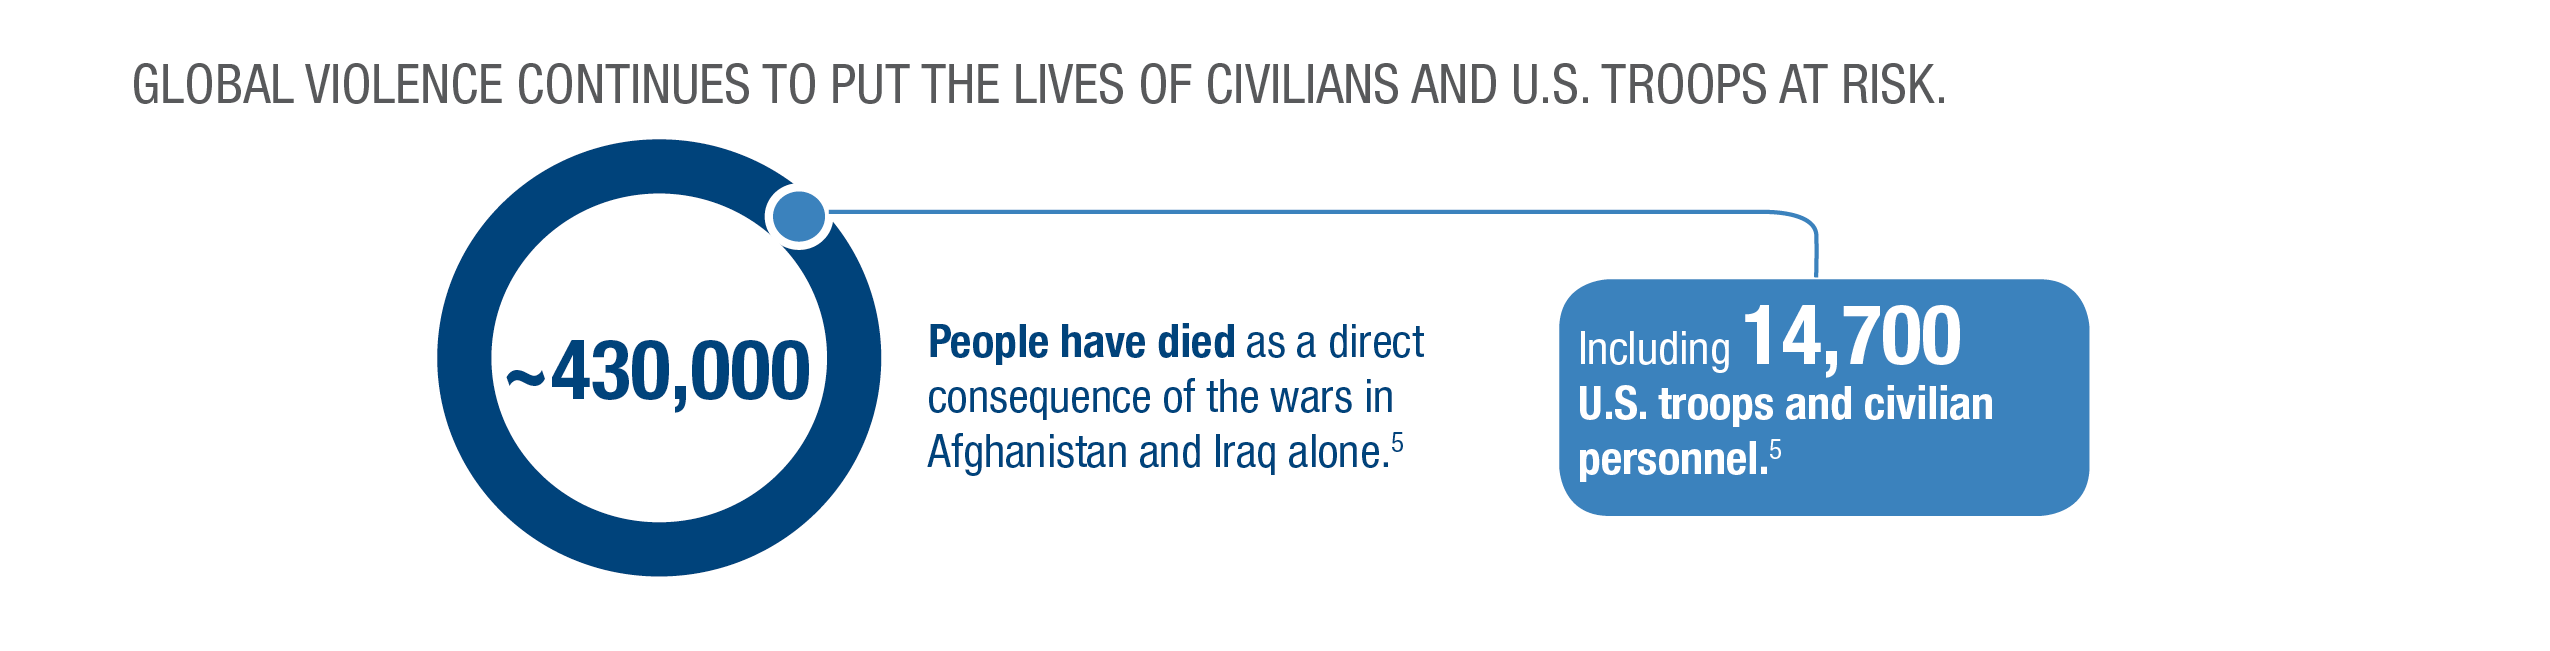 Infographic: Global violence continues to put the lives of civilians and U.S. troops at risk. 430,000 people have died as a direct consequence of the wars in Afghanistan and Iraq alone--including 147,00 U.S. troops and civilian personnel. 

June 2019